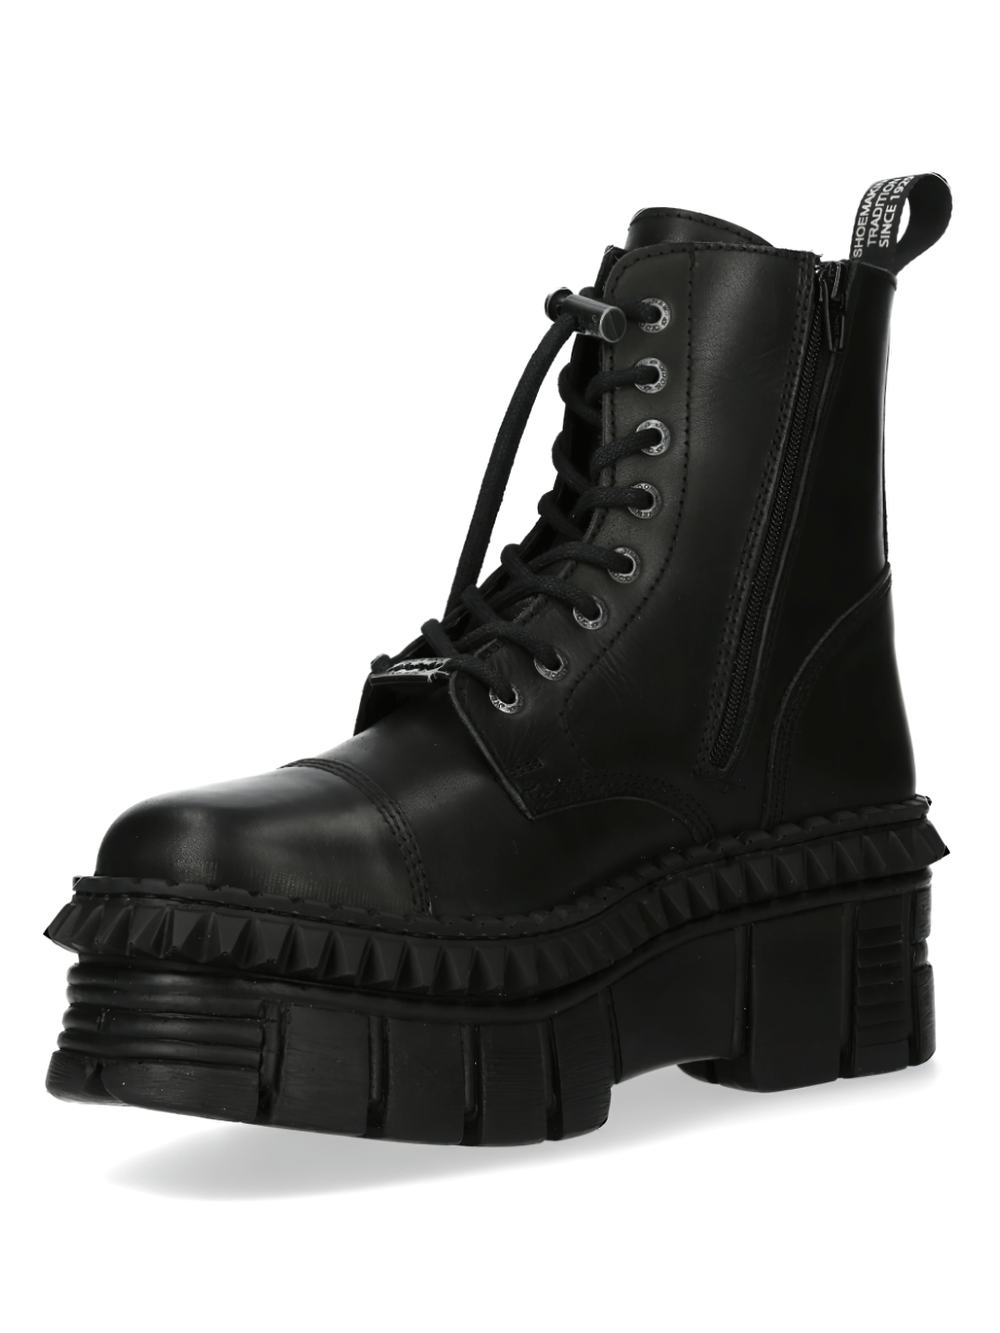 NEW ROCK Black Military Unisex Ankle Boots with Platforms